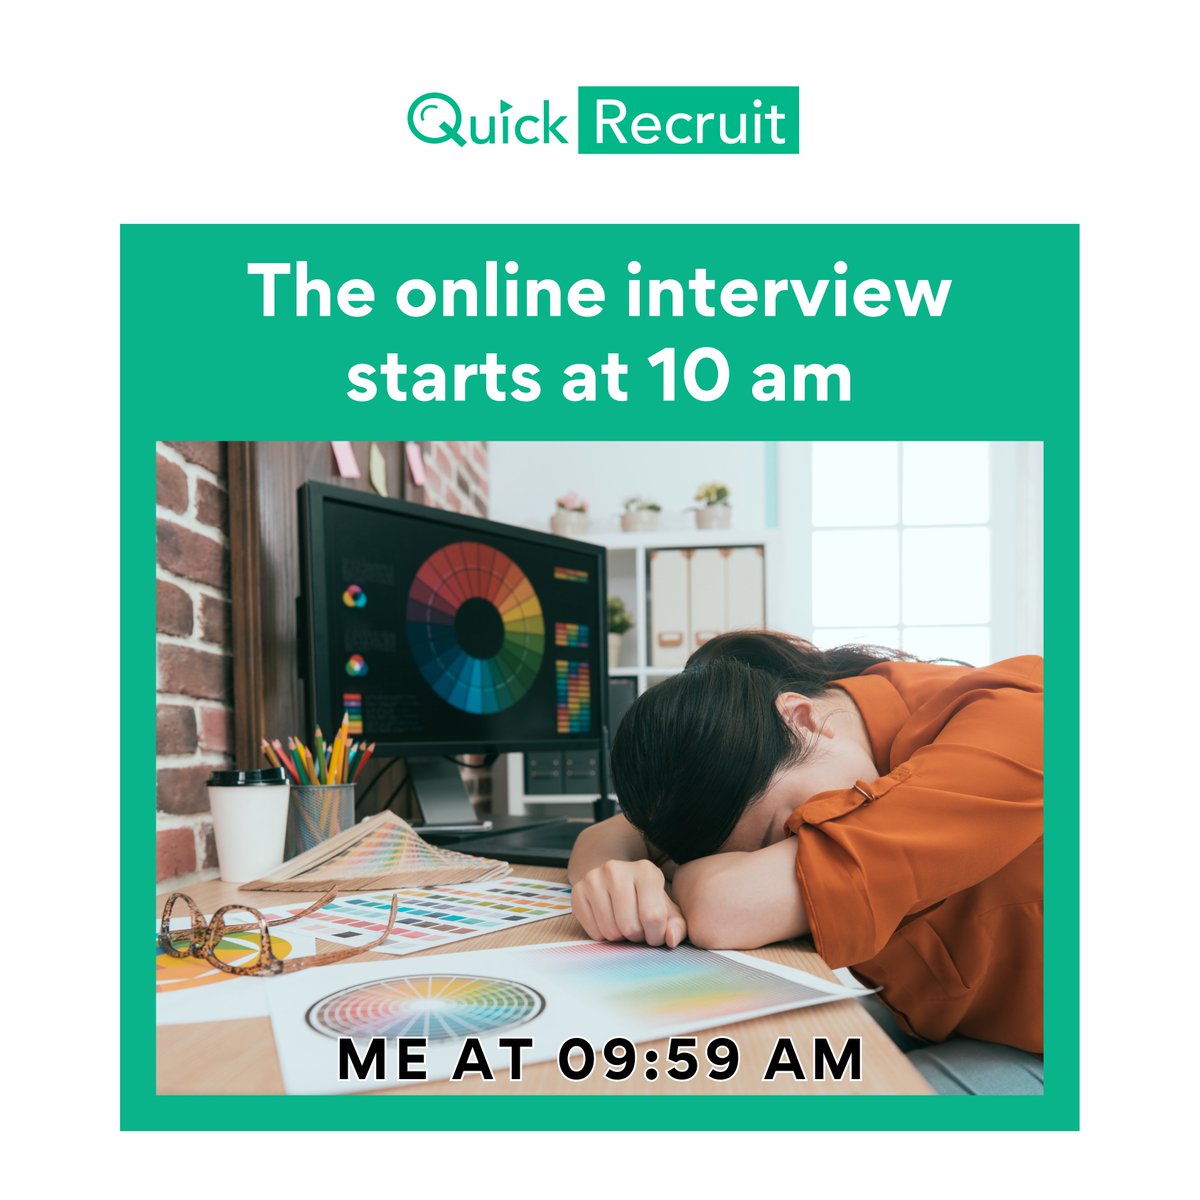 Counting down to the online interview at 10 am like... Feeling Drowsy!  

#meme #onlineinterview #viralmemes #newmeme #tech #virtualinterviews #interviewasaservice #quickrecruit